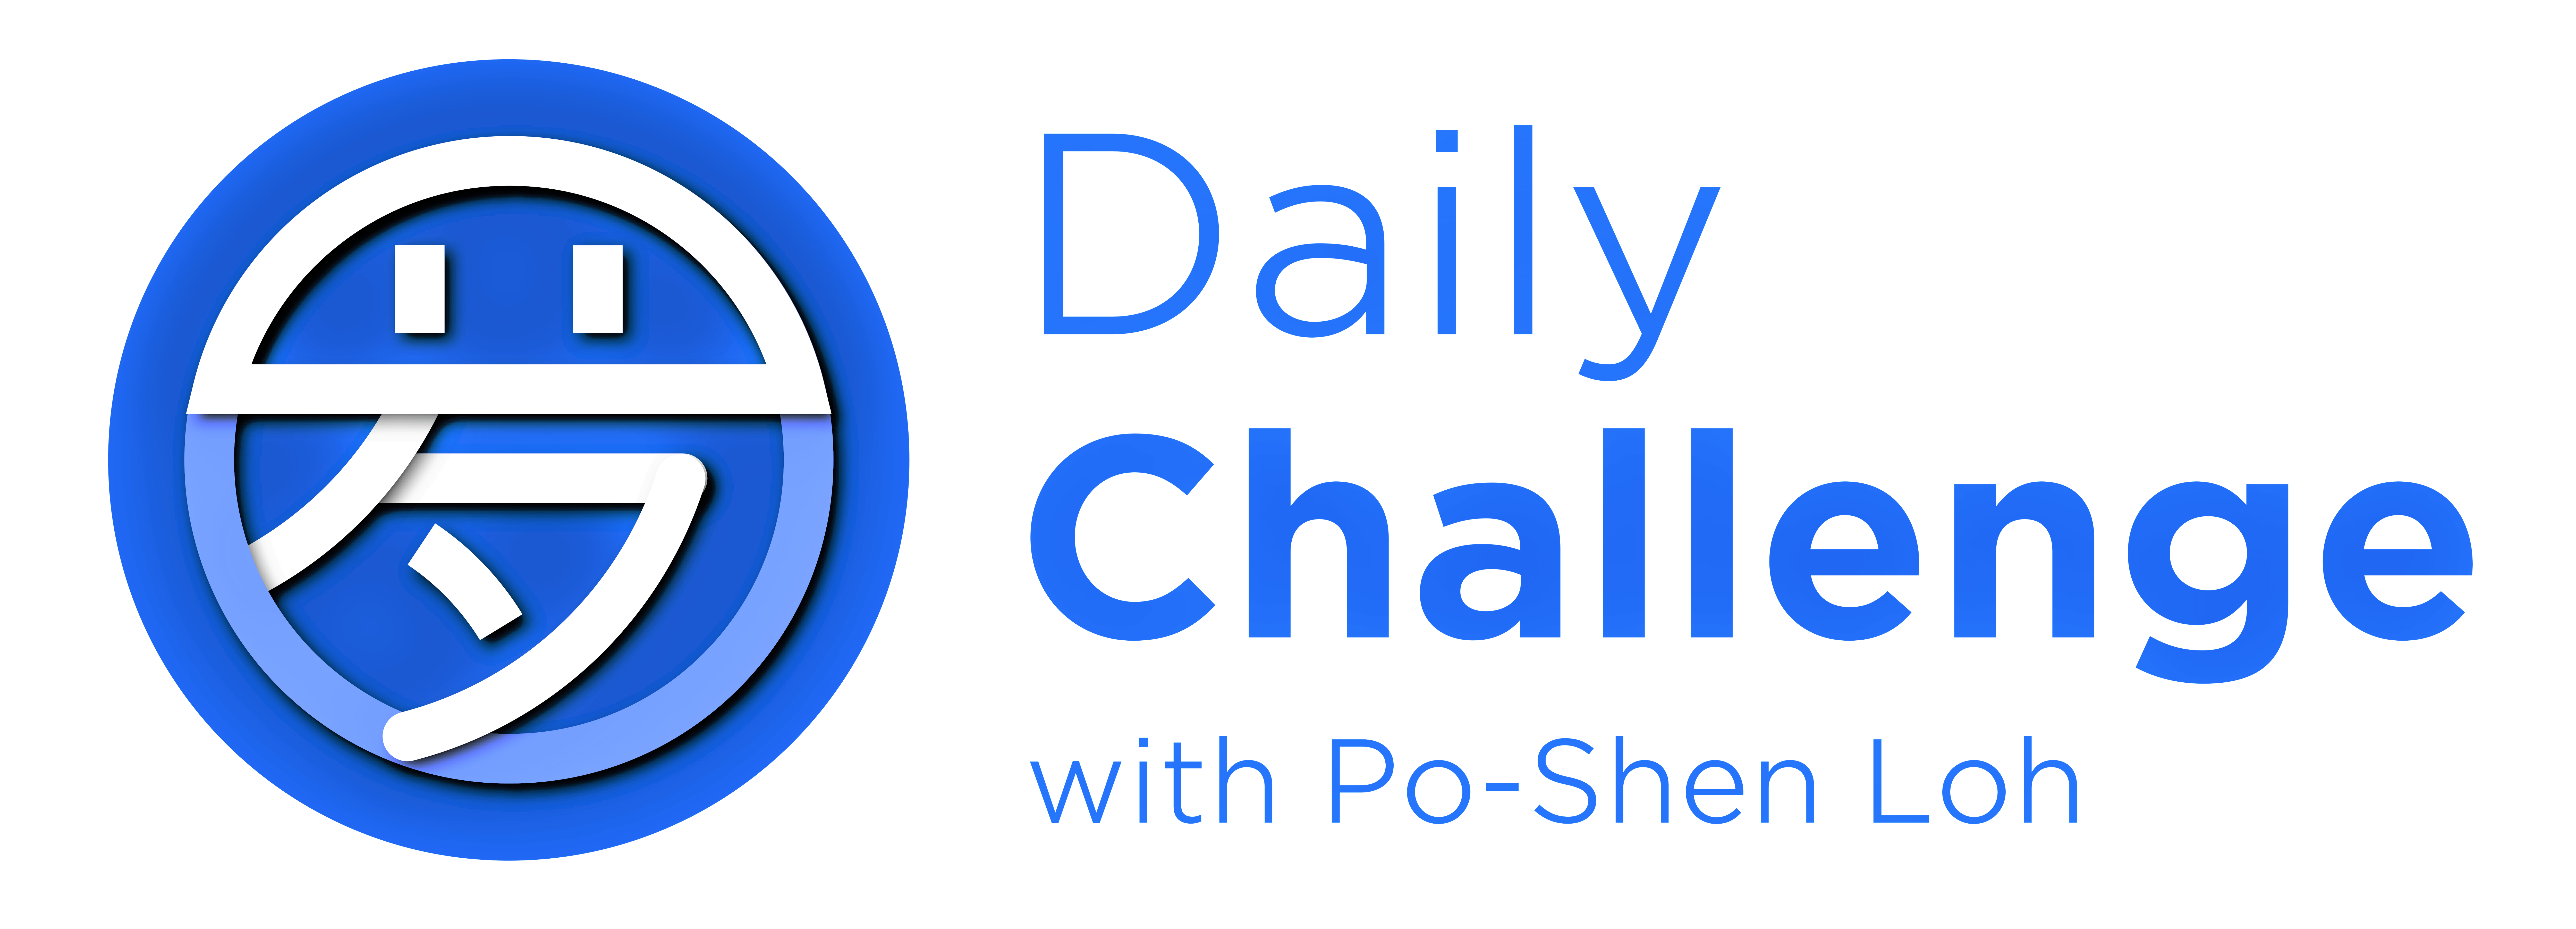 The Daily Challenge